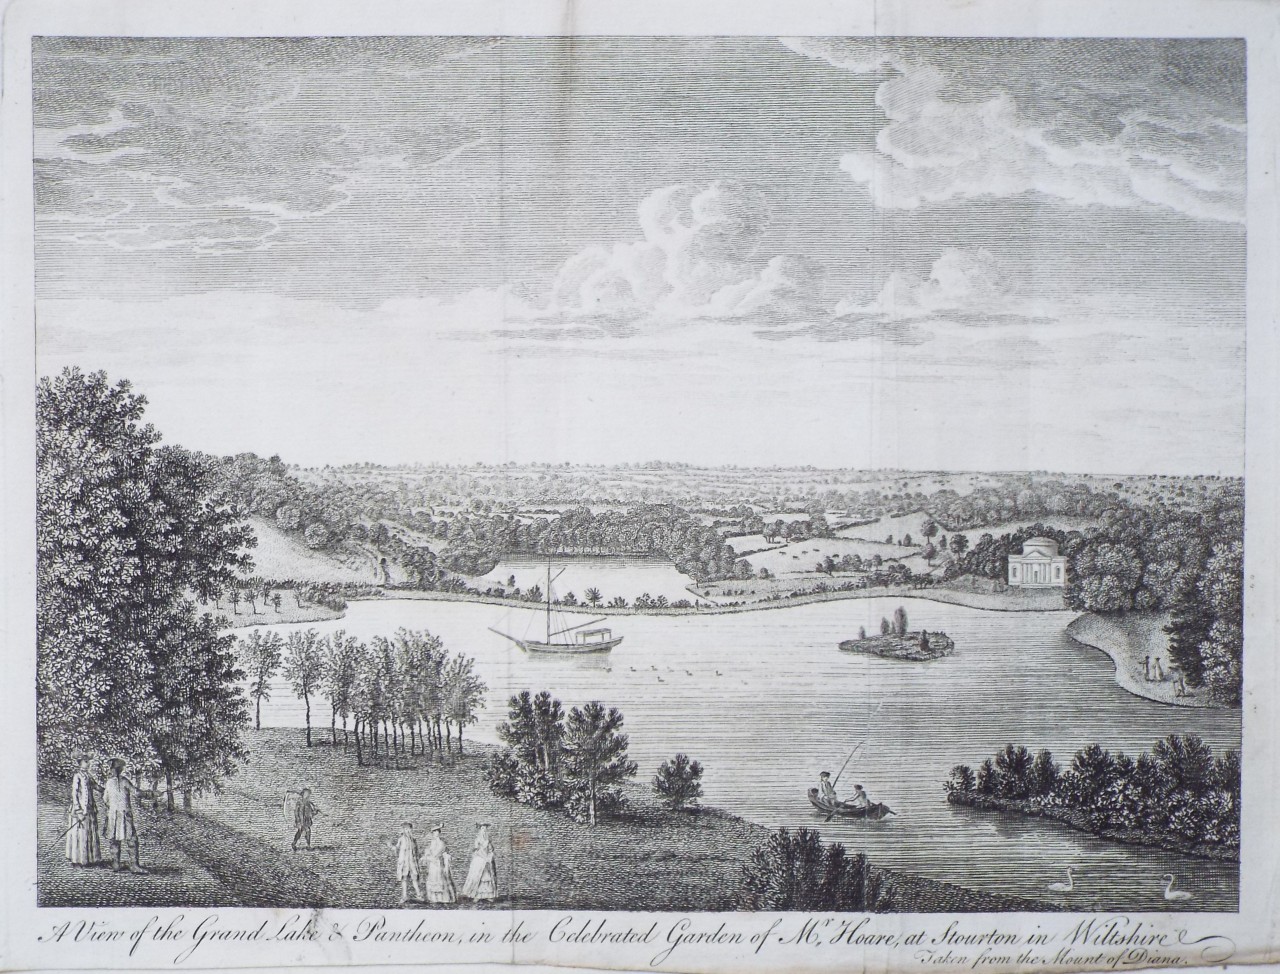 Print - A View of the Grand Lake & Pantheon in the Celebrated Garden of Mr.Hoare, at Stourton in Wiltshire Taken from the Mount of Diana